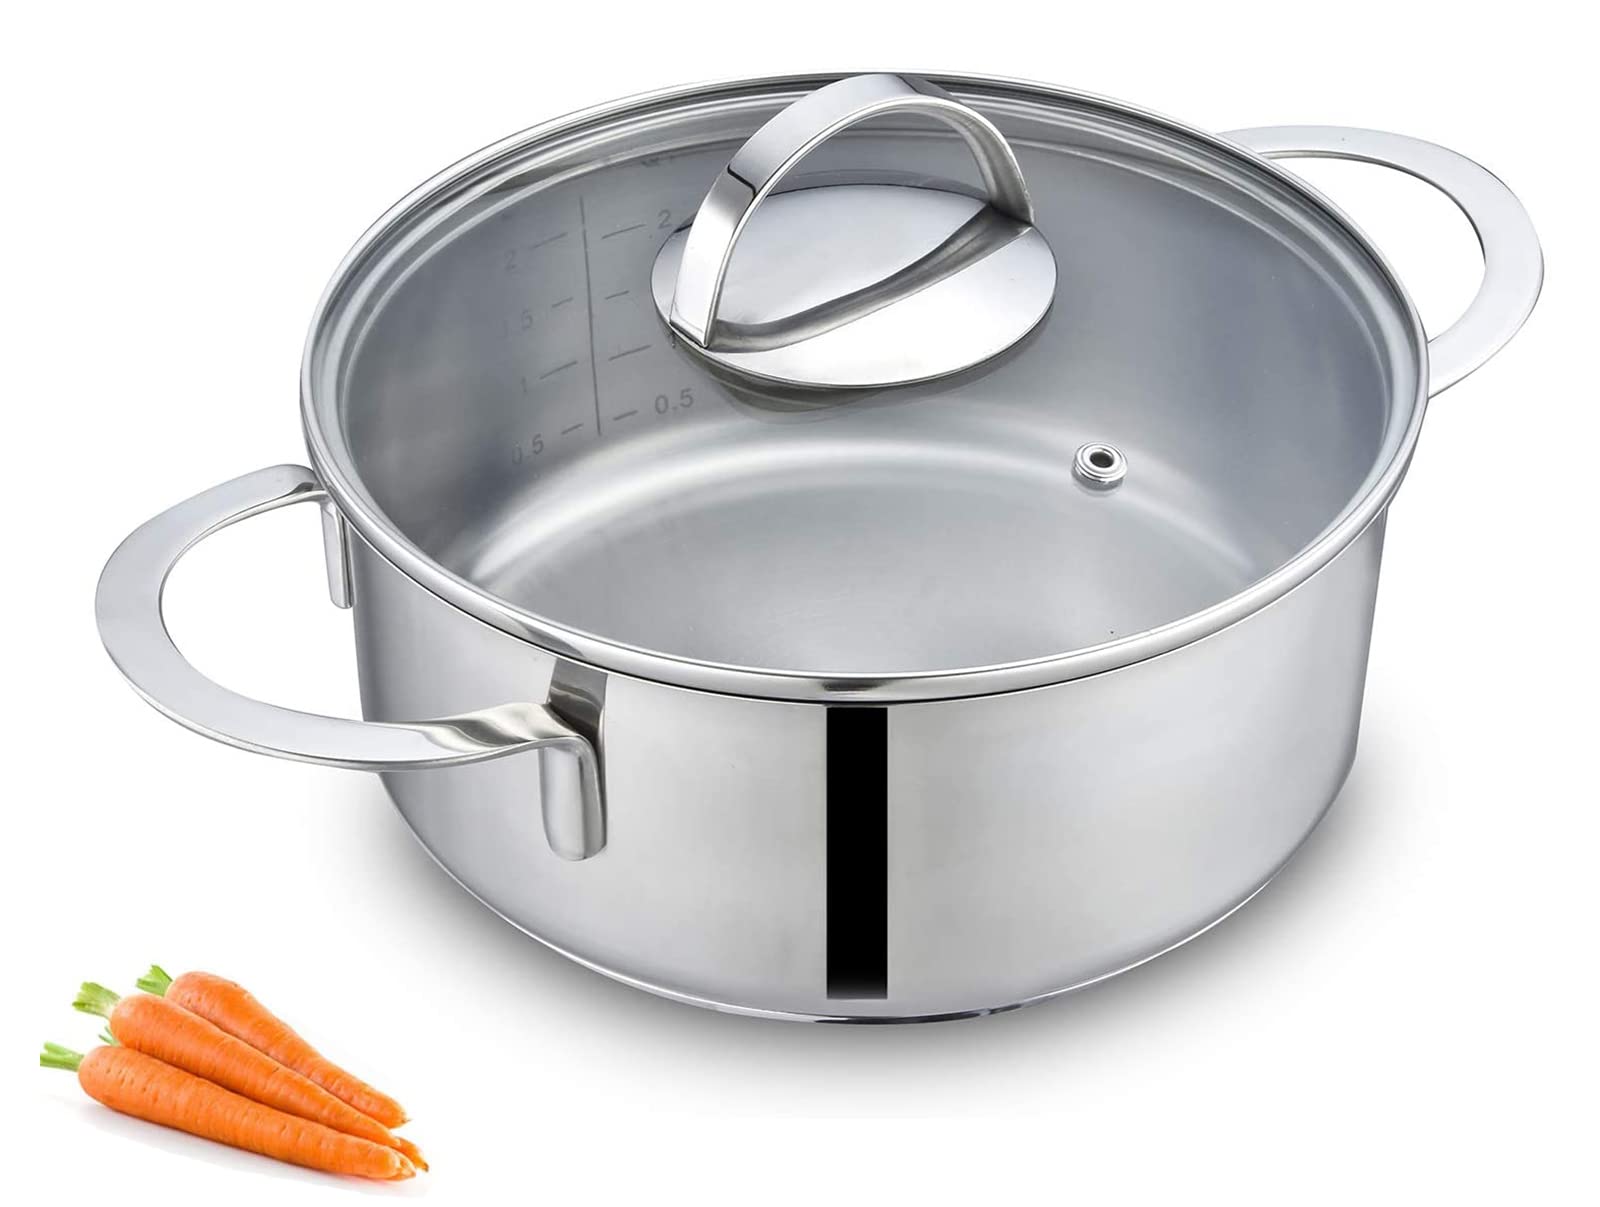 Cyrosa Dutch Oven Pot with Lid, 3 Quart Stock Pot Nickel Free Stainless Steel, Small Stockpots, Induction Pot - Soup Pot 3 Qt Cooking Pot Induction...